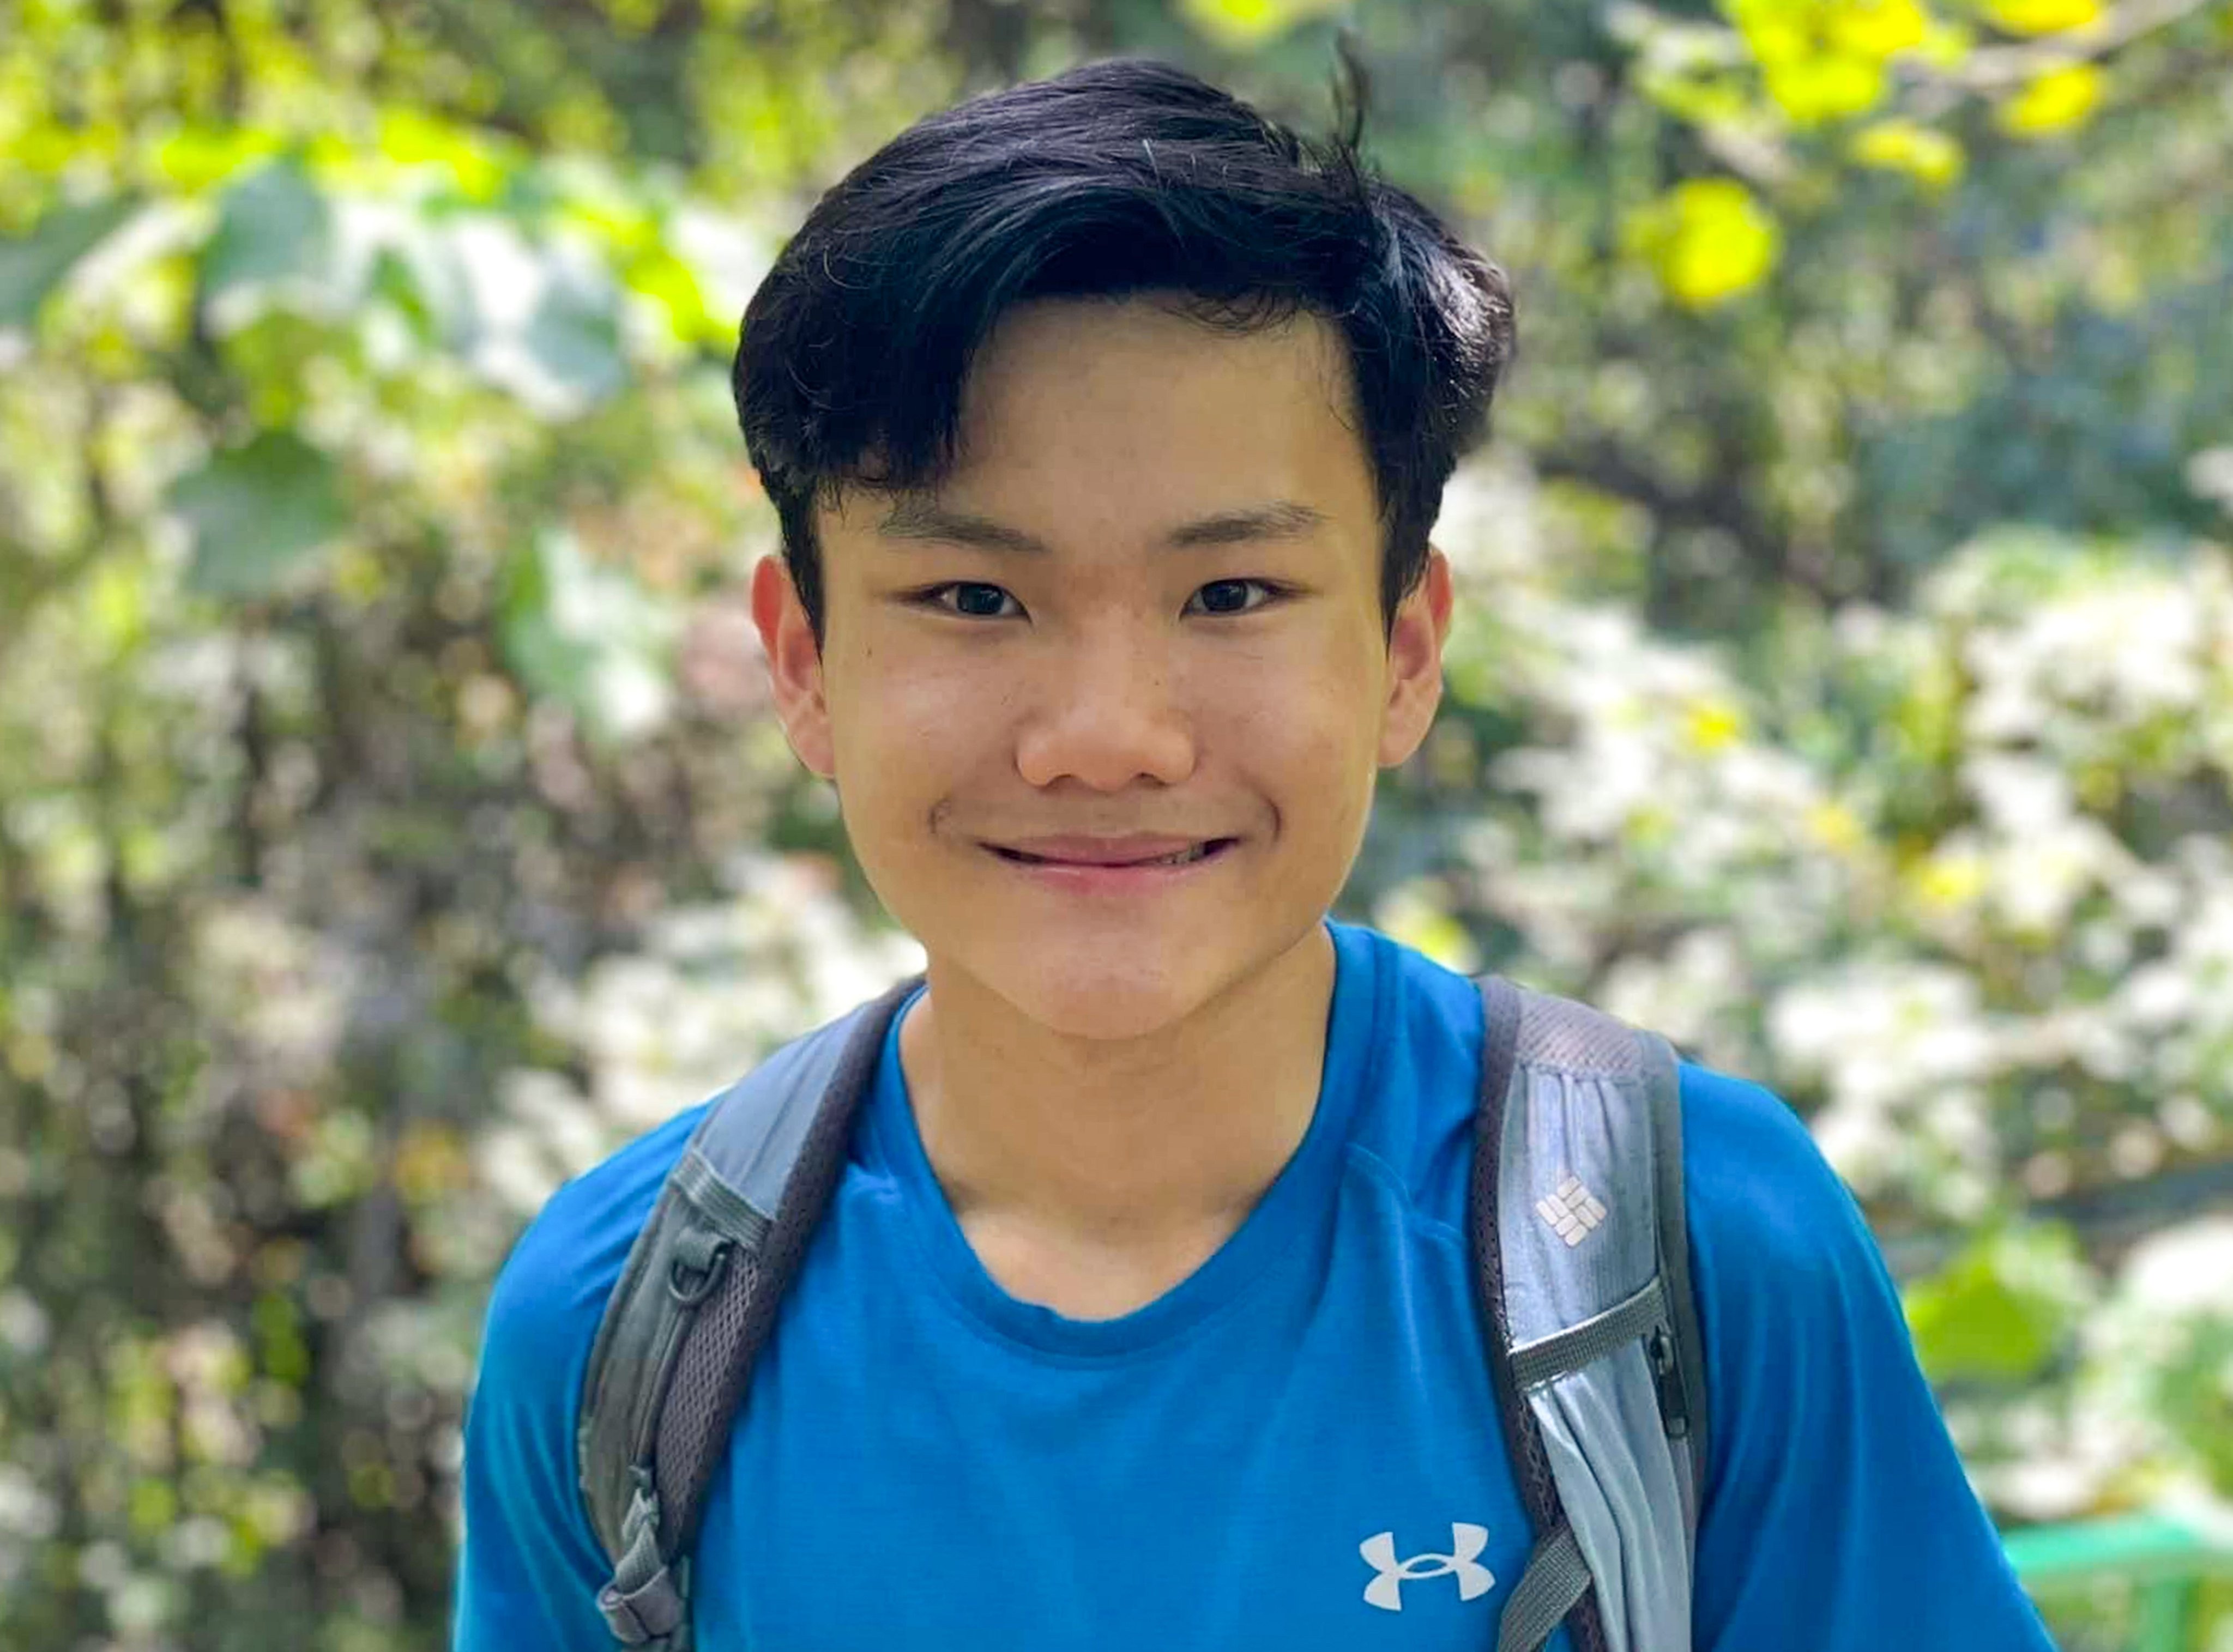 Matthew Tsang has been missing since walking out of the Diocesan Boys’ School in Mong Kok on Wednesday. He is seen here in a picture taken earlier. Photo: Handout 